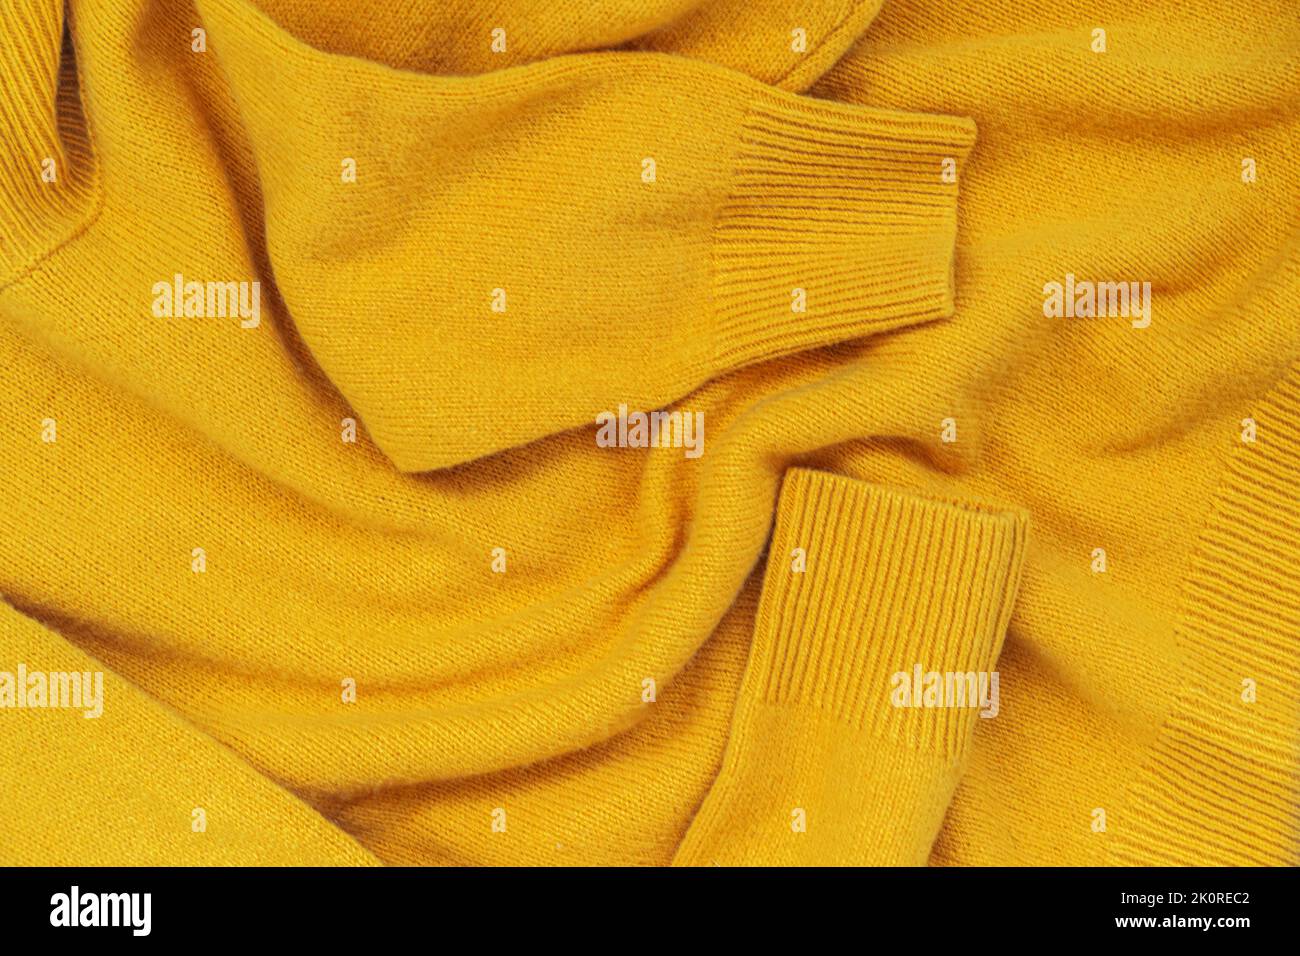 Knitted yellow wool pullover, flat lay, background. Homemade, shopping collection of autumn clothing Stock Photo